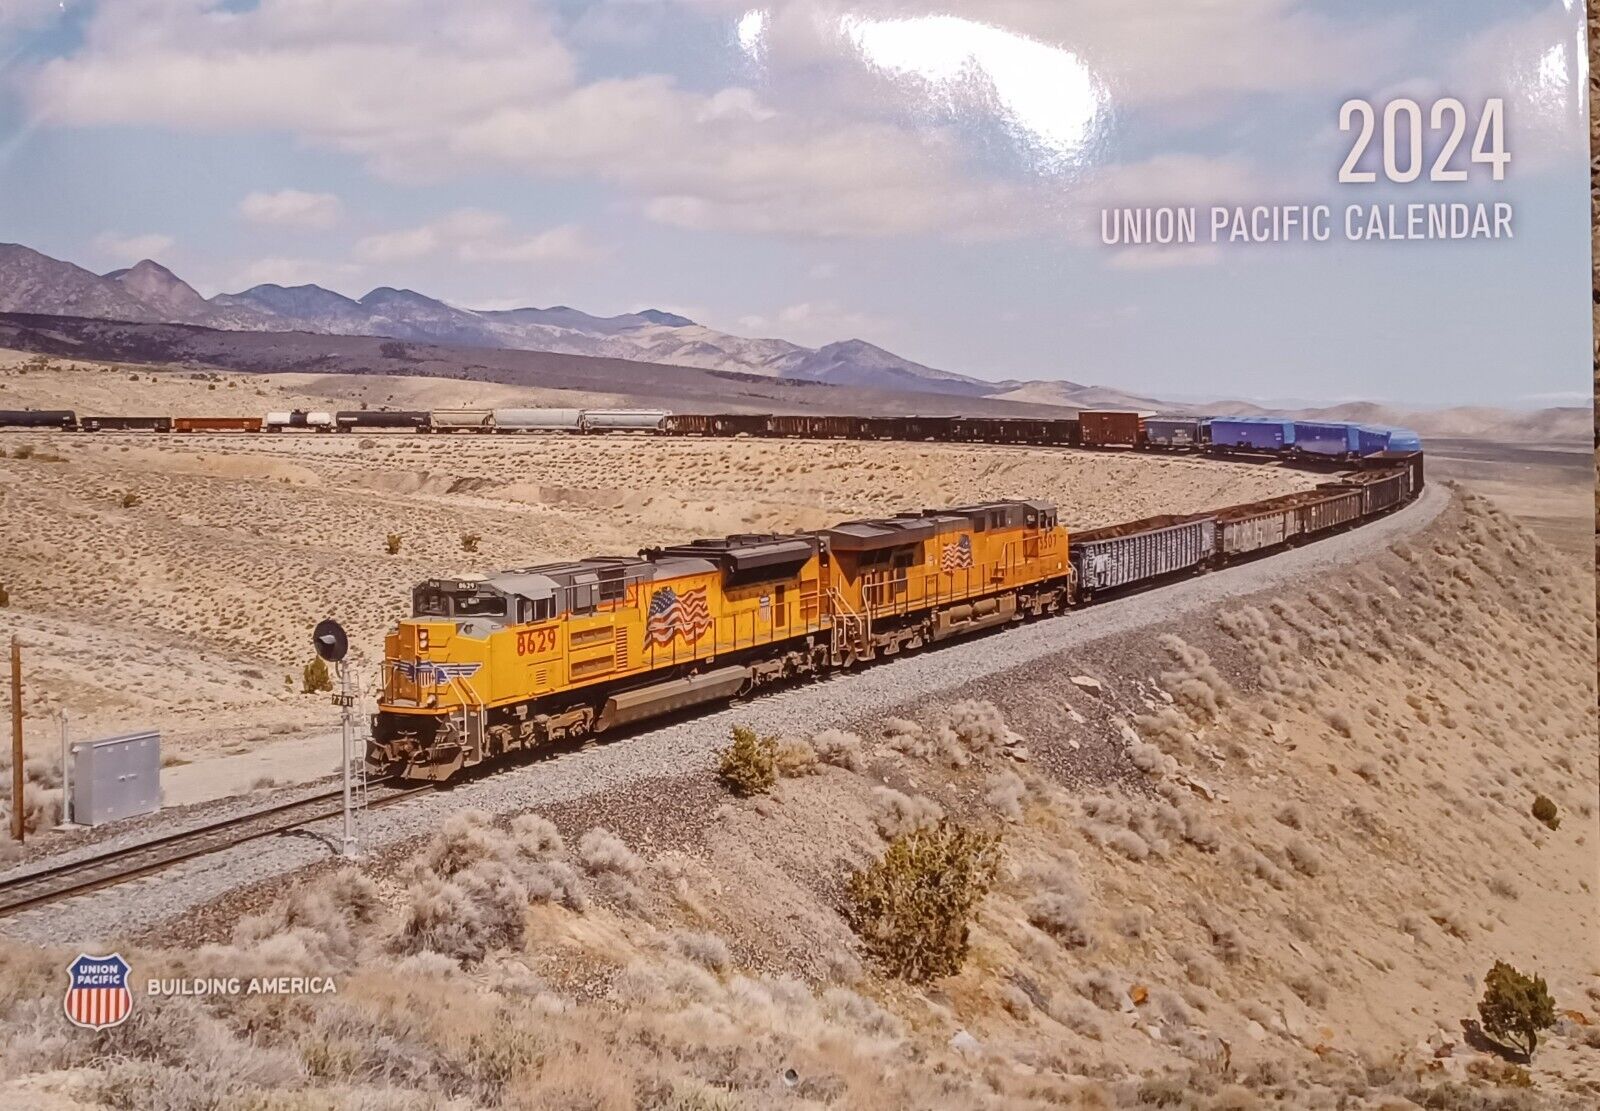 2024 Union Pacific Calendar, full color photos, NEW for Sale